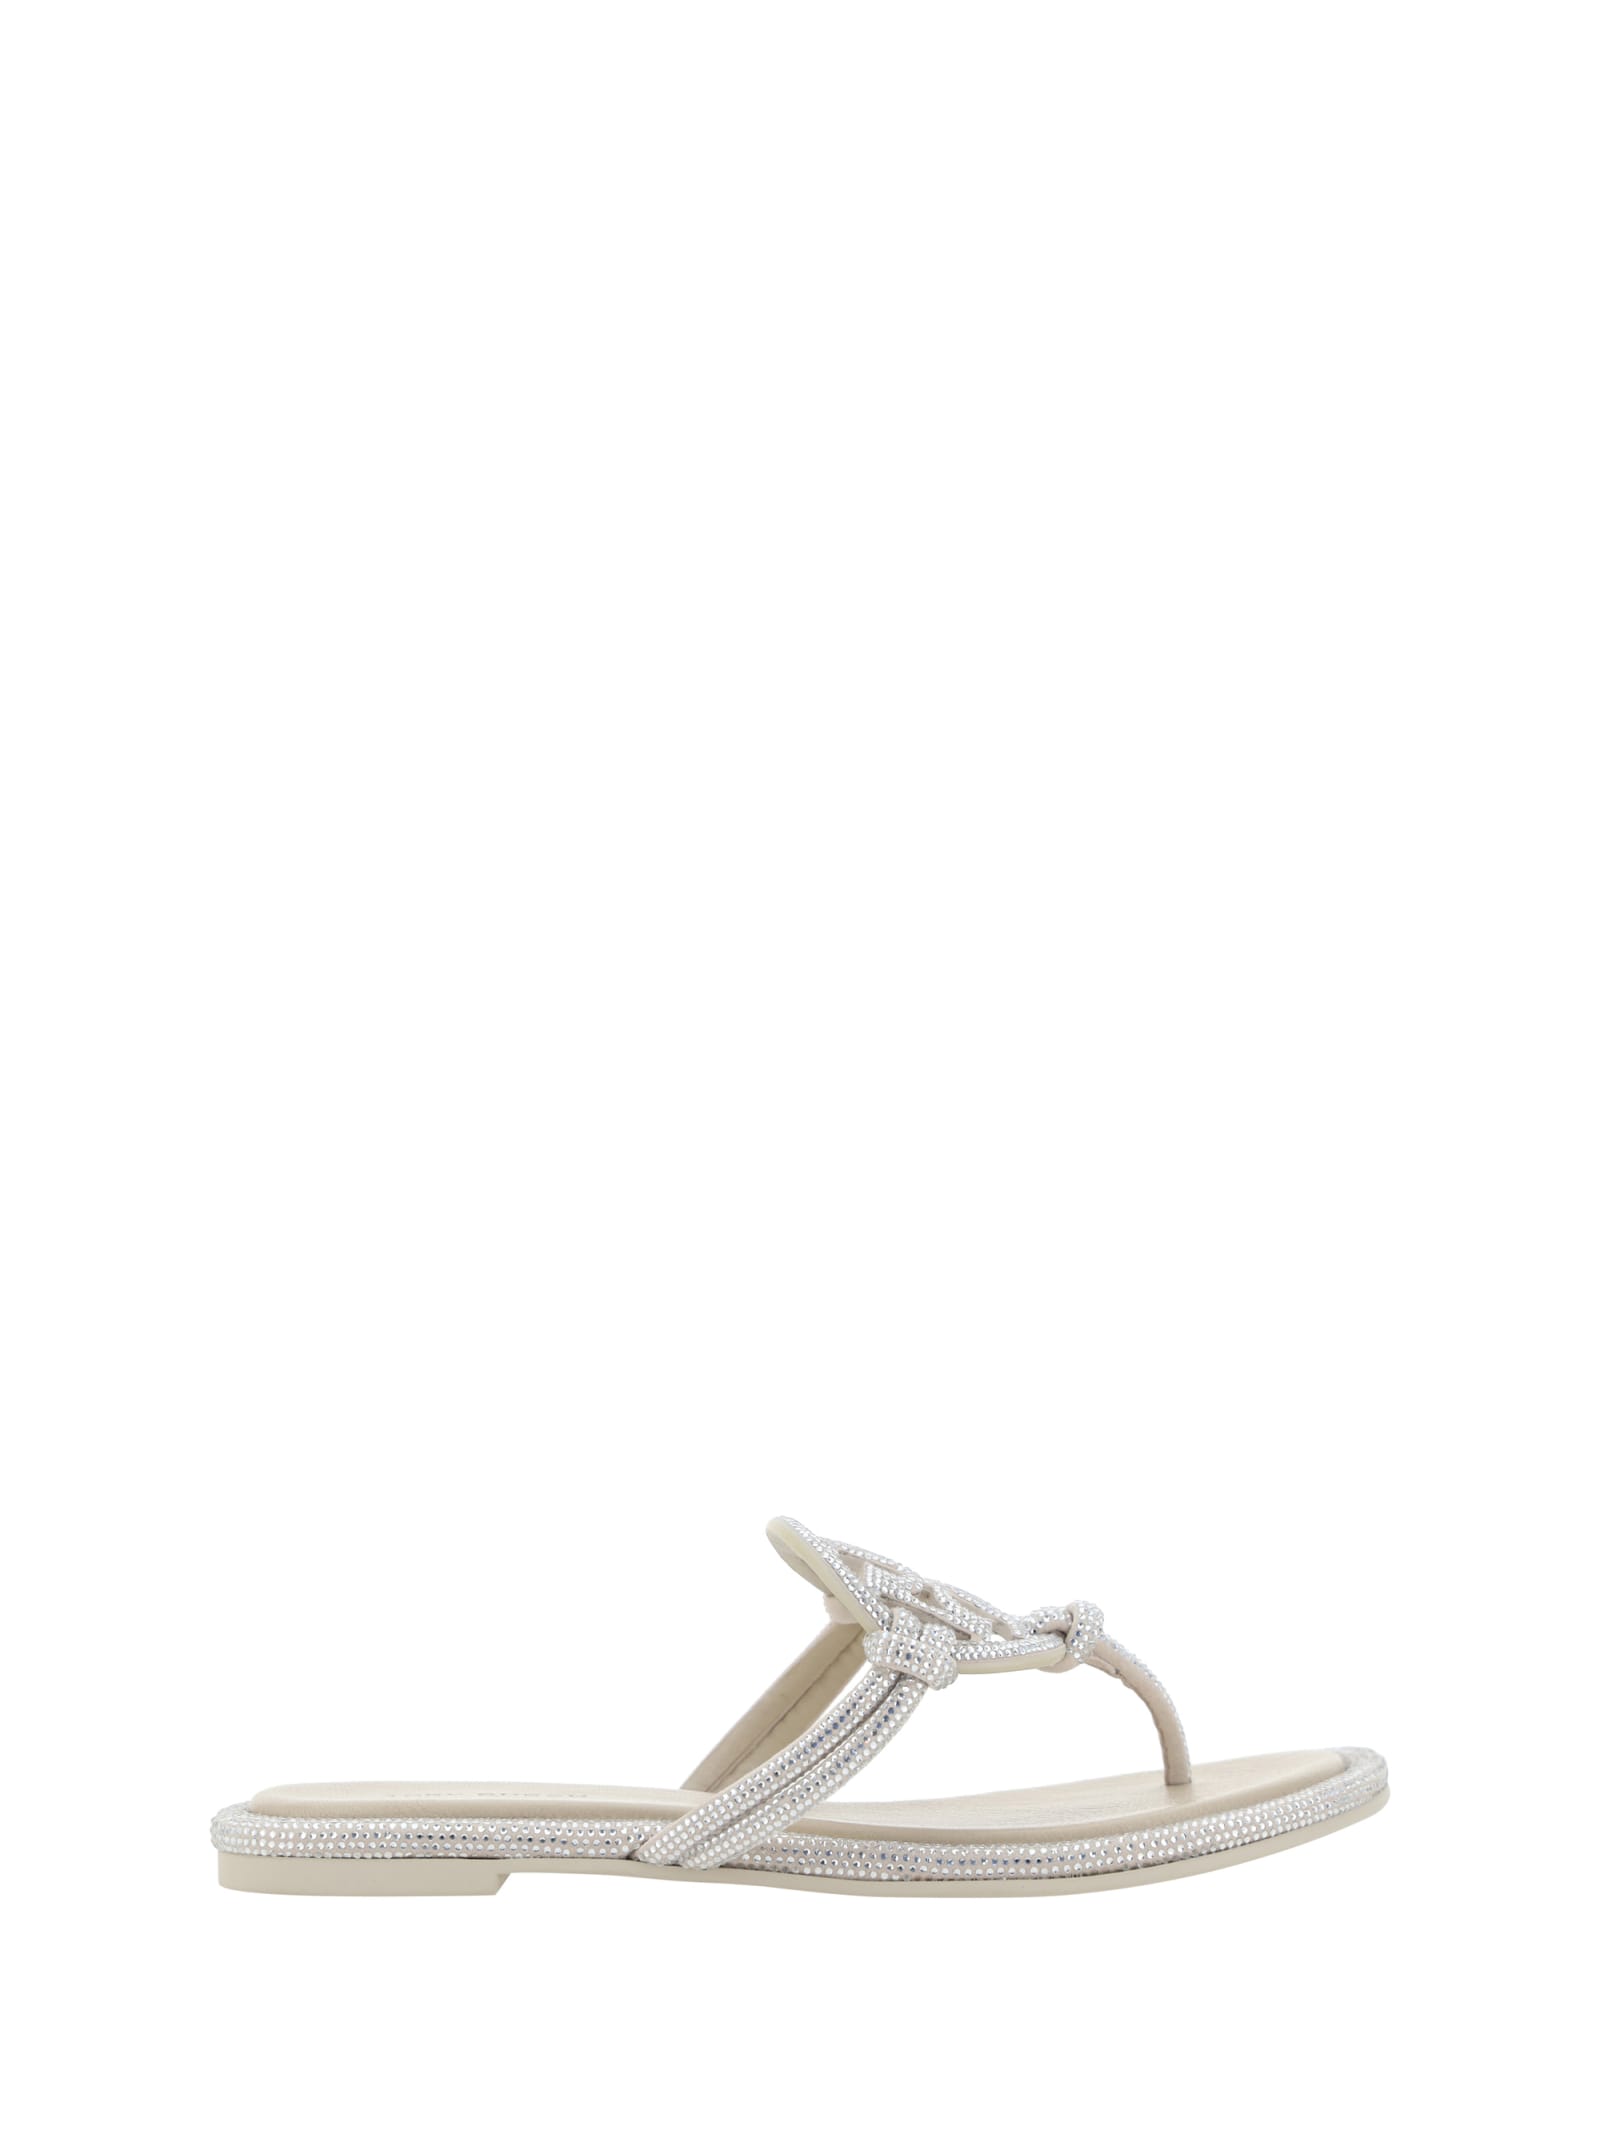 Tory Burch Miller Sandals In Stone Gray